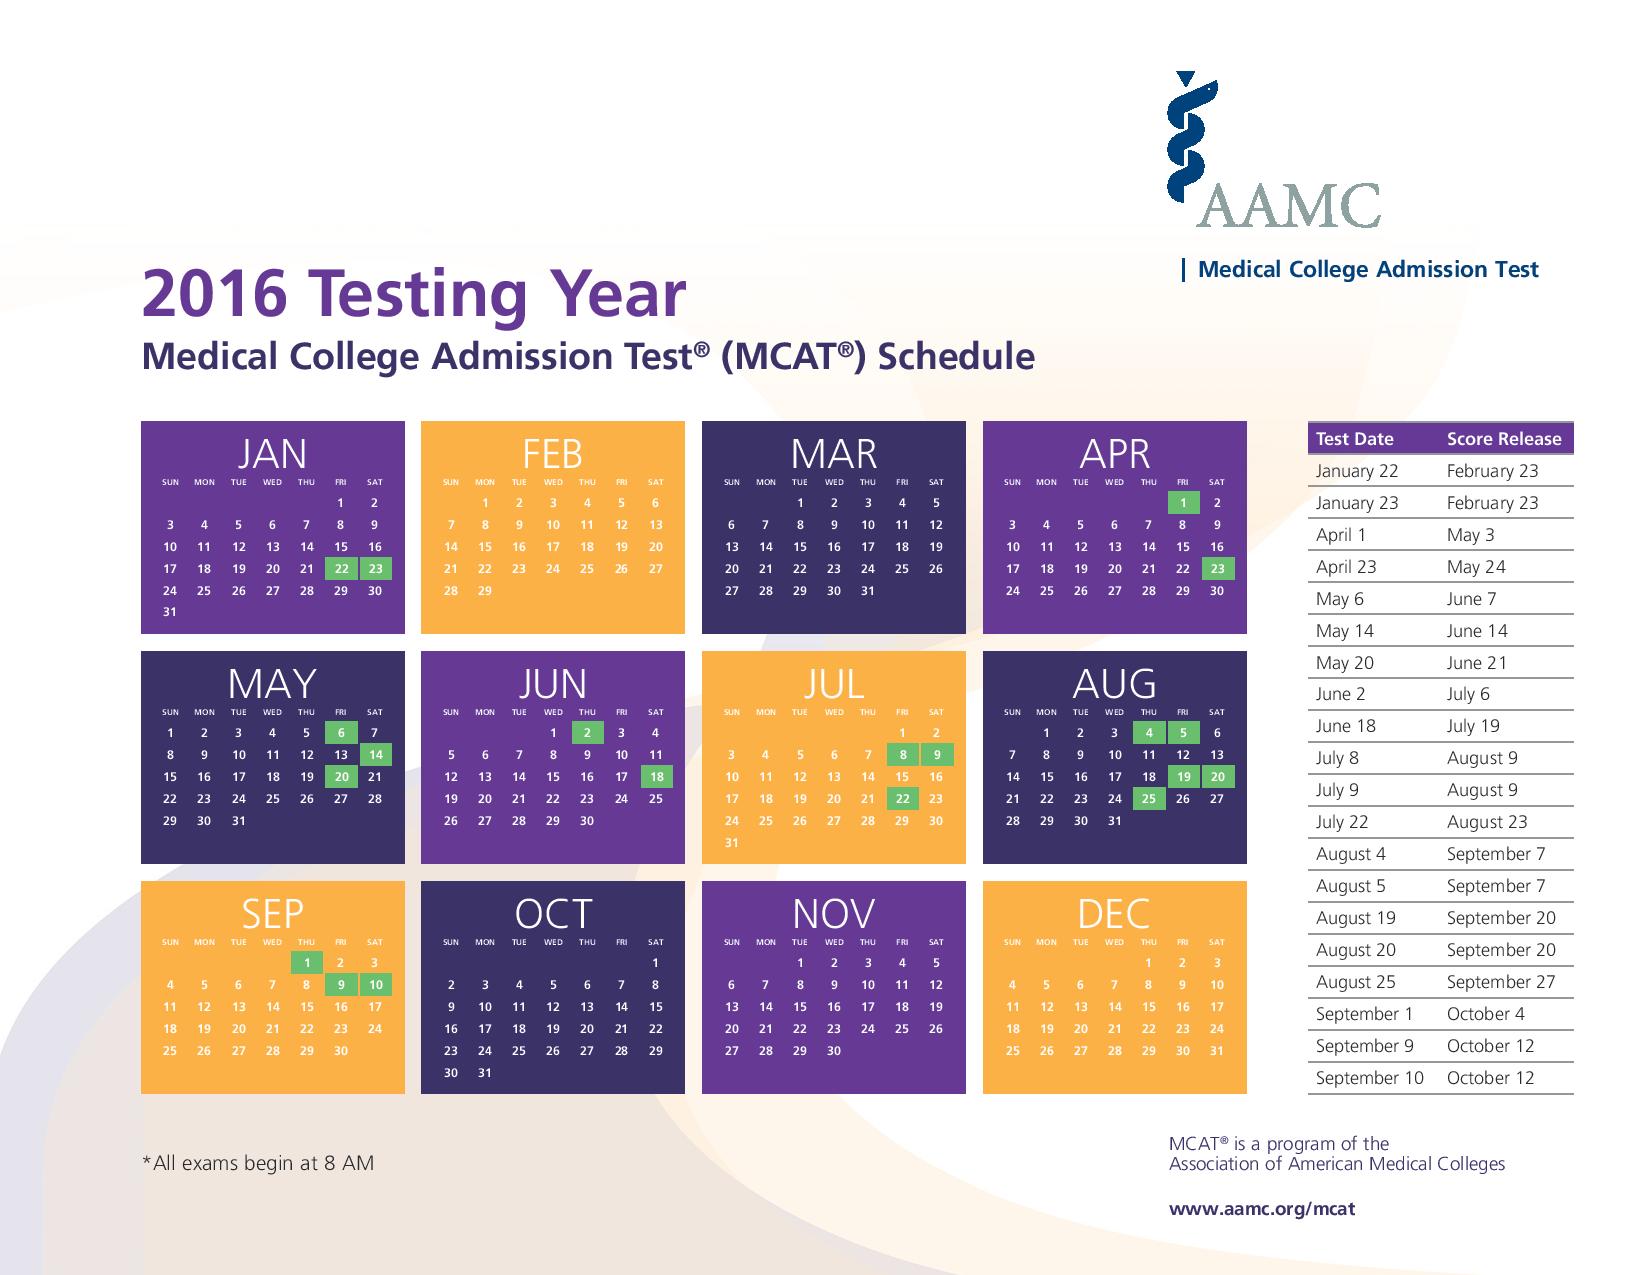 When to Take the MCAT